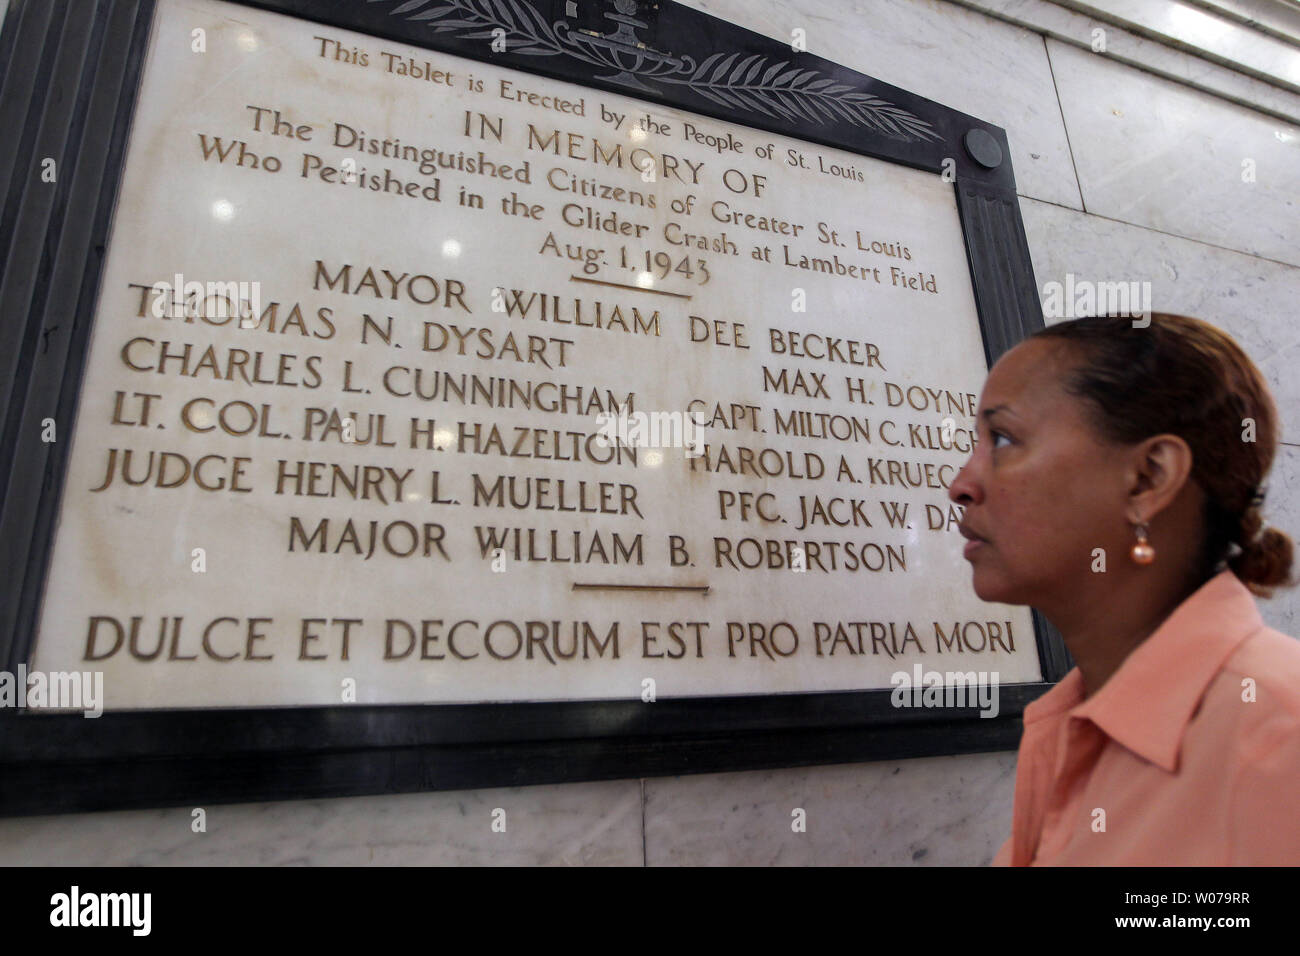 Sable Campbell-Jones, Director of Diversity for the City of St. Louis, stops to read a placque remembering a glider crash that killed the Mayor of St. Louis and nine others, on the 70th anniversary in City Hall in St. Louis on August 1, 2013.  The glider, which had passed Army testing, had made a flight earlier in the day, but crashed nose first at Lambert Field after the wing fell off on its second flight, carrying dignitaries.     UPI/Bill Greenblatt Stock Photo